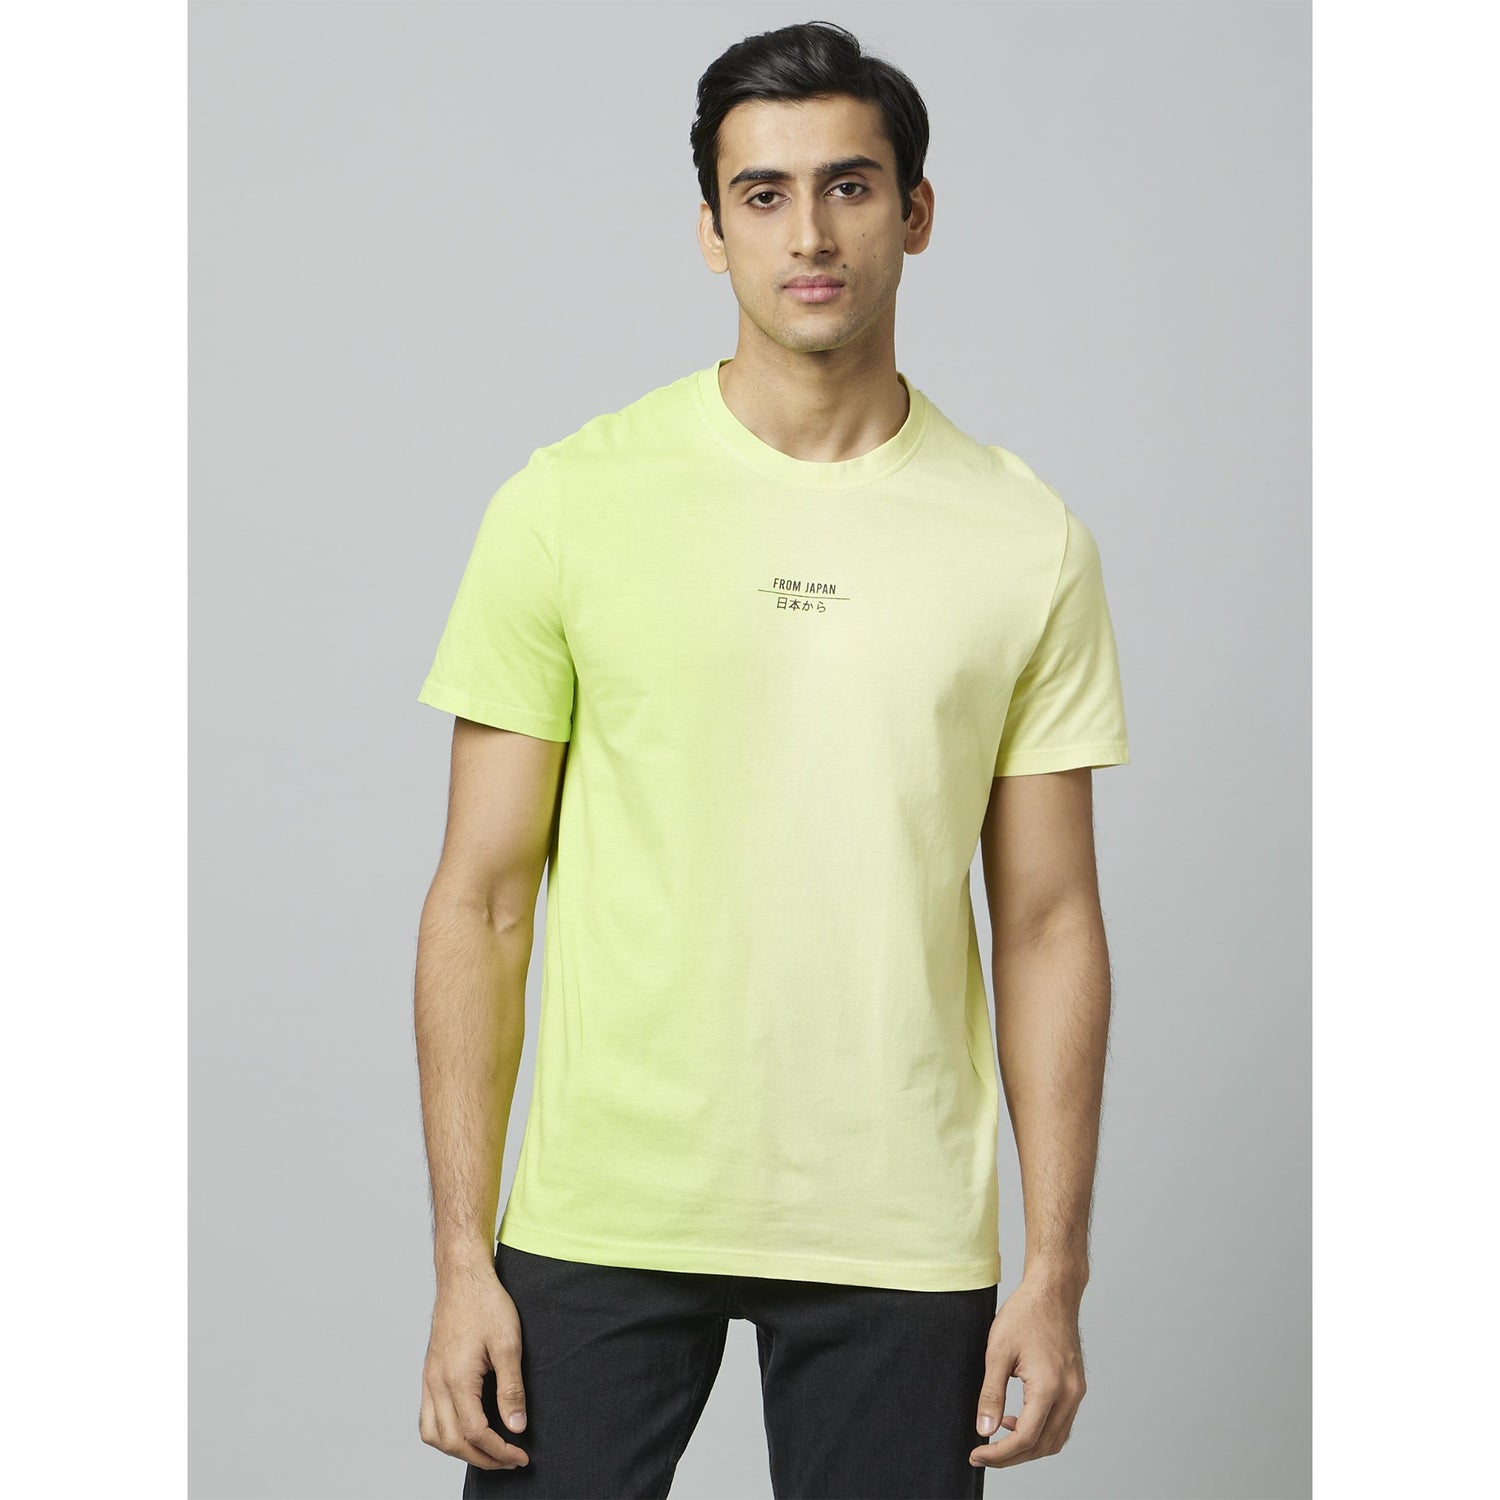 Yellow Graphic Printed Short Sleeves Round Neck Tshirt (DESIDE)